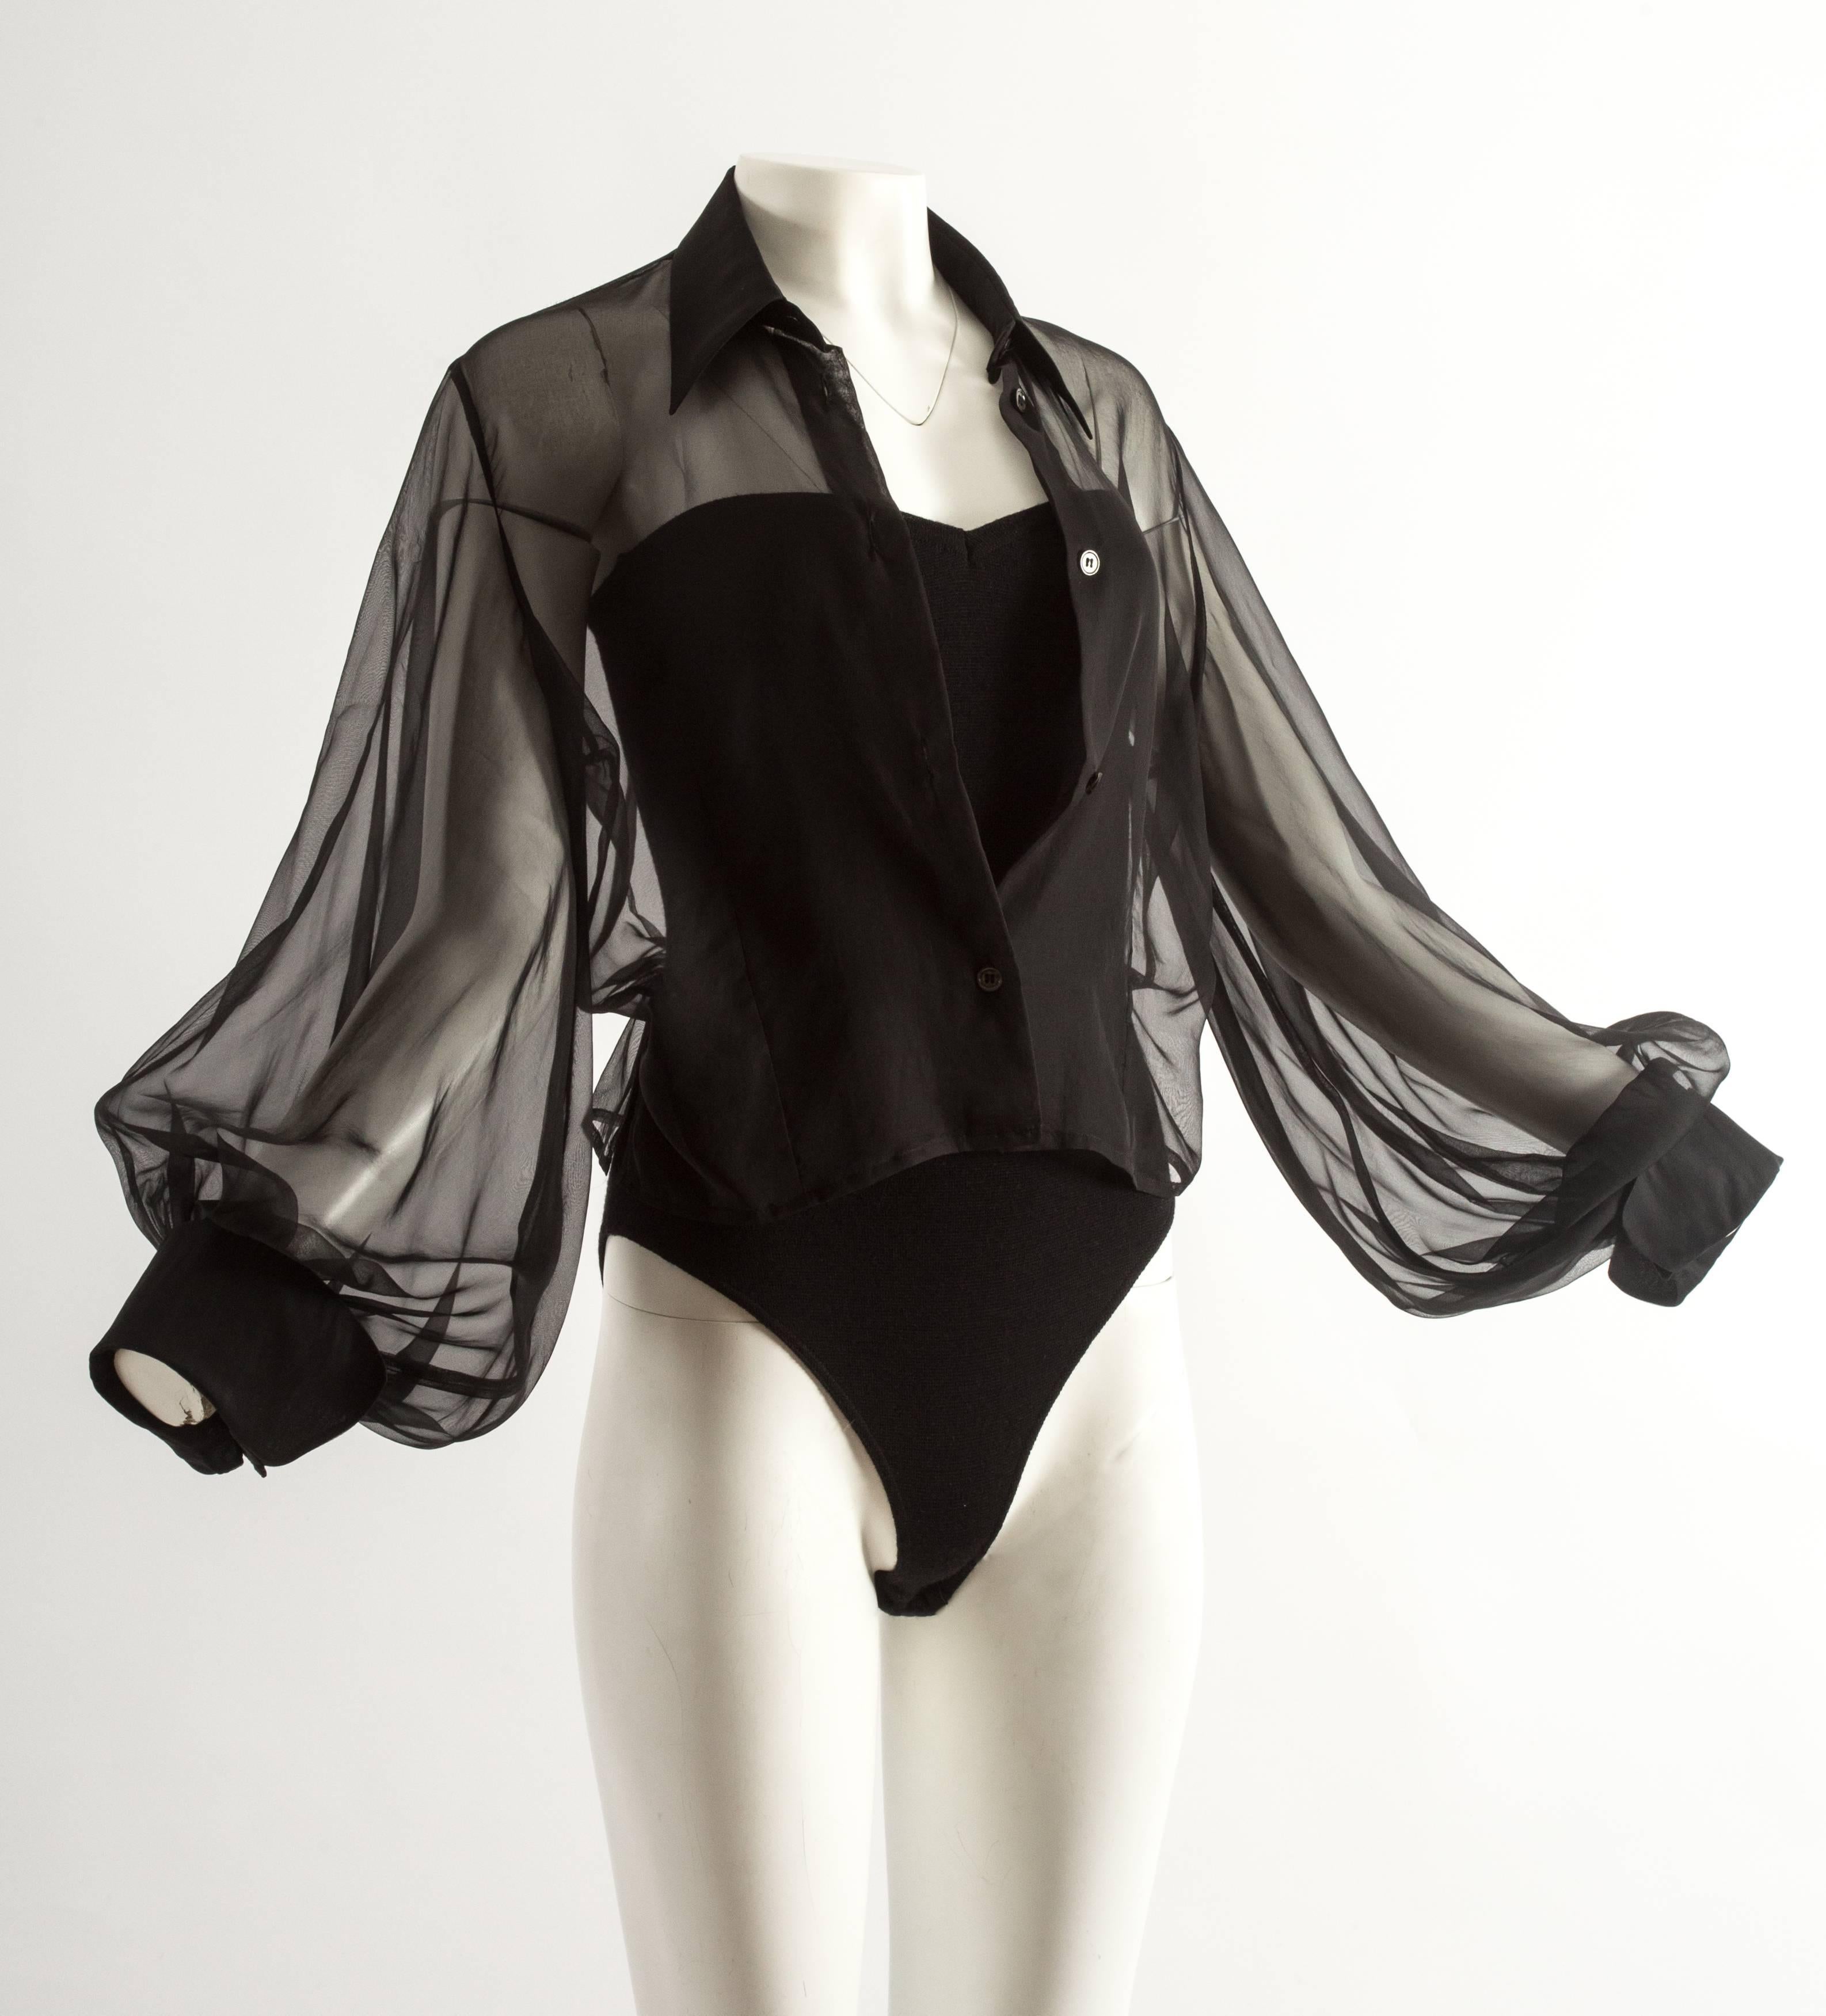 Black Gianfranco Ferre Autumn-Winter 1992 knitted bodysuit with attached blouse